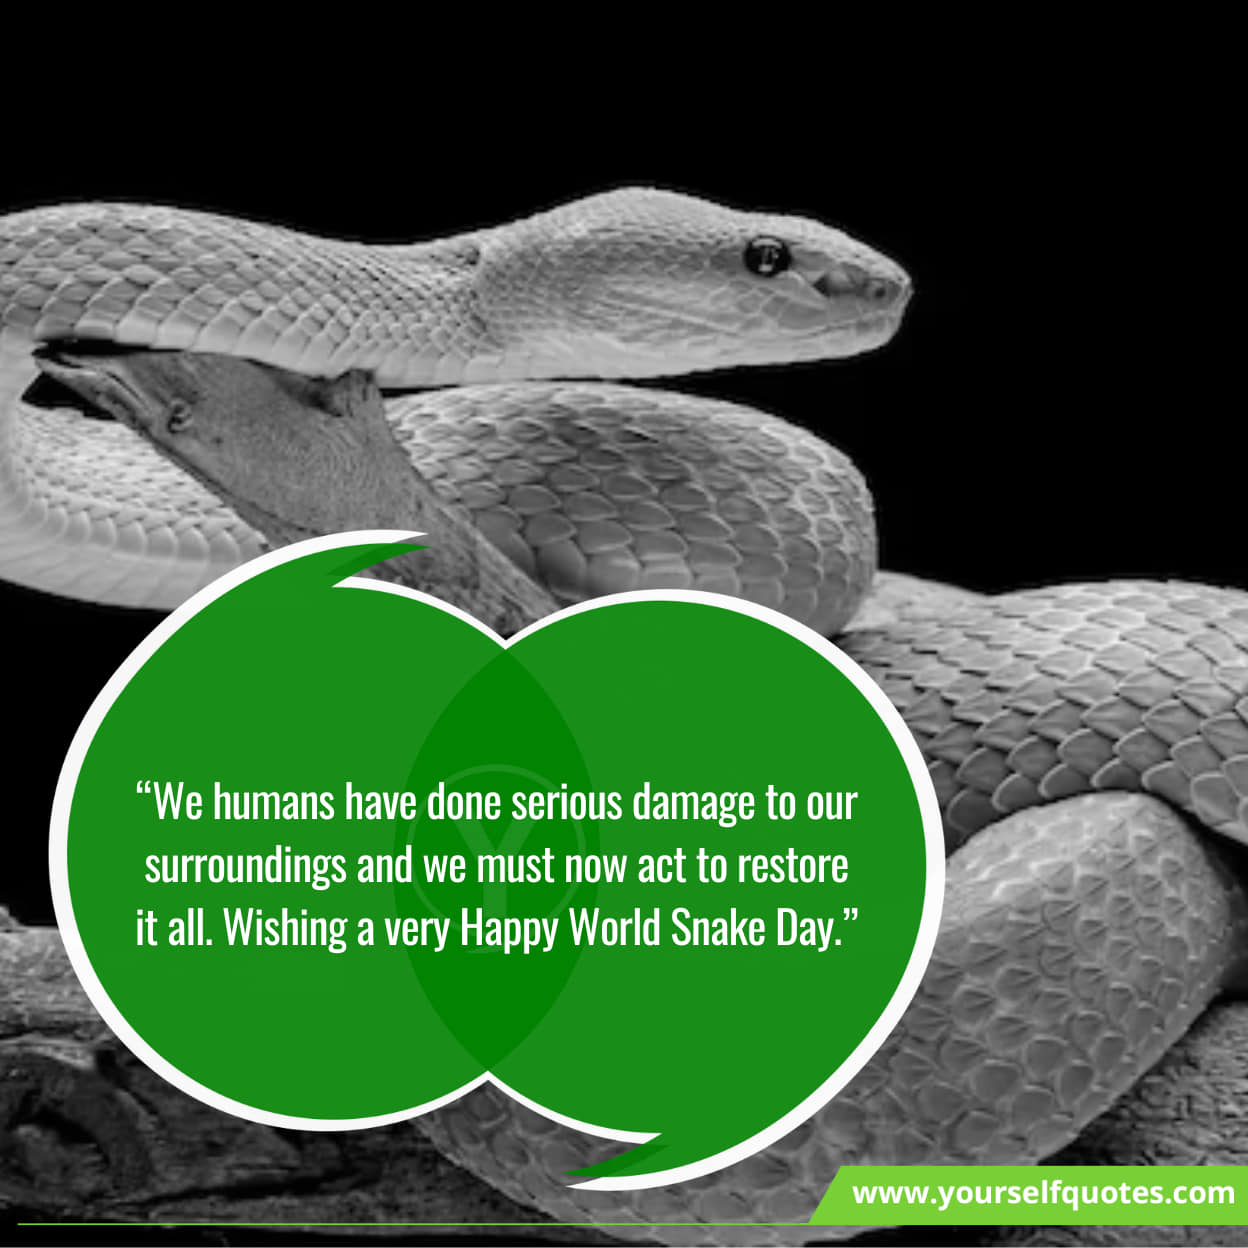 Happy World Snake Day greetings